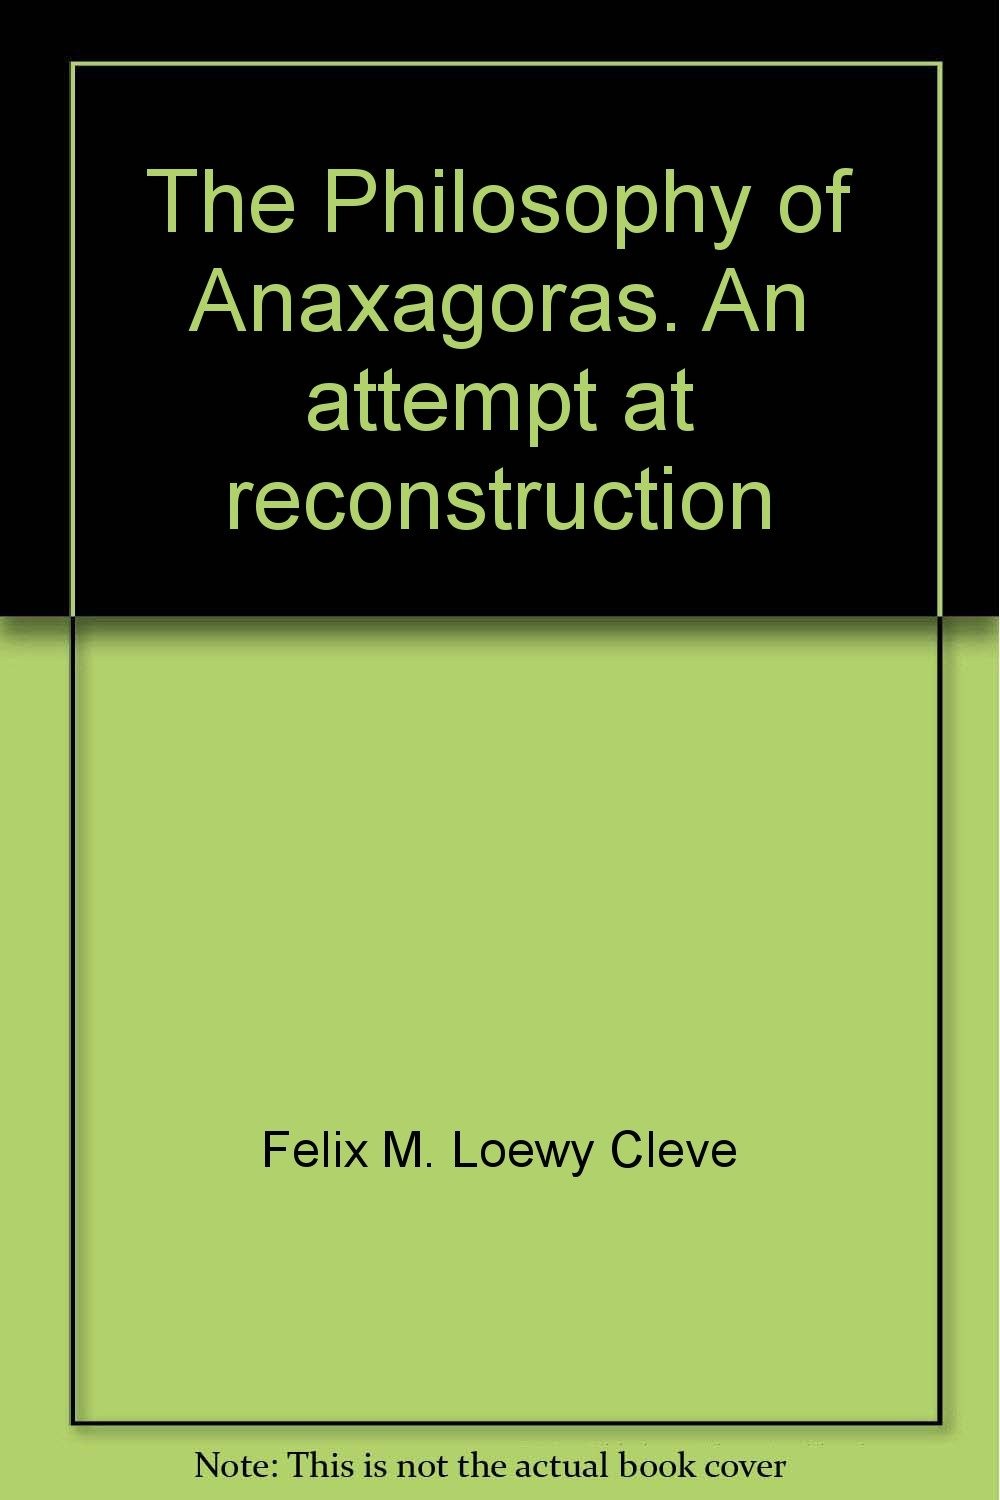 The Philosophy of Anaxagoras: An Attempt at Reconstruction by Felix M. Cleve